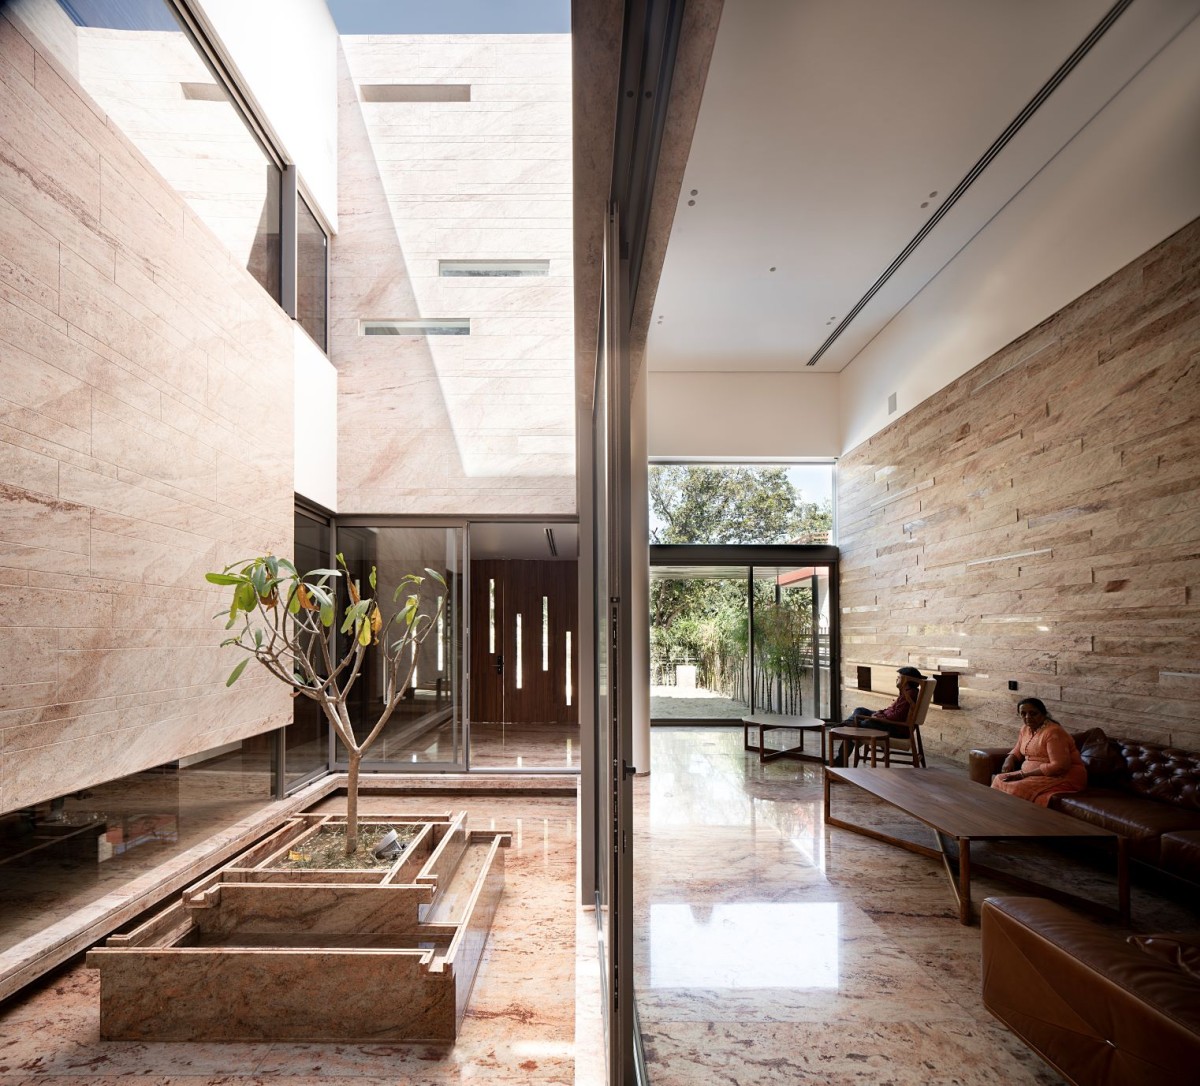 Central Courtyard and Lounge area of Residence 145 by Charged Voids